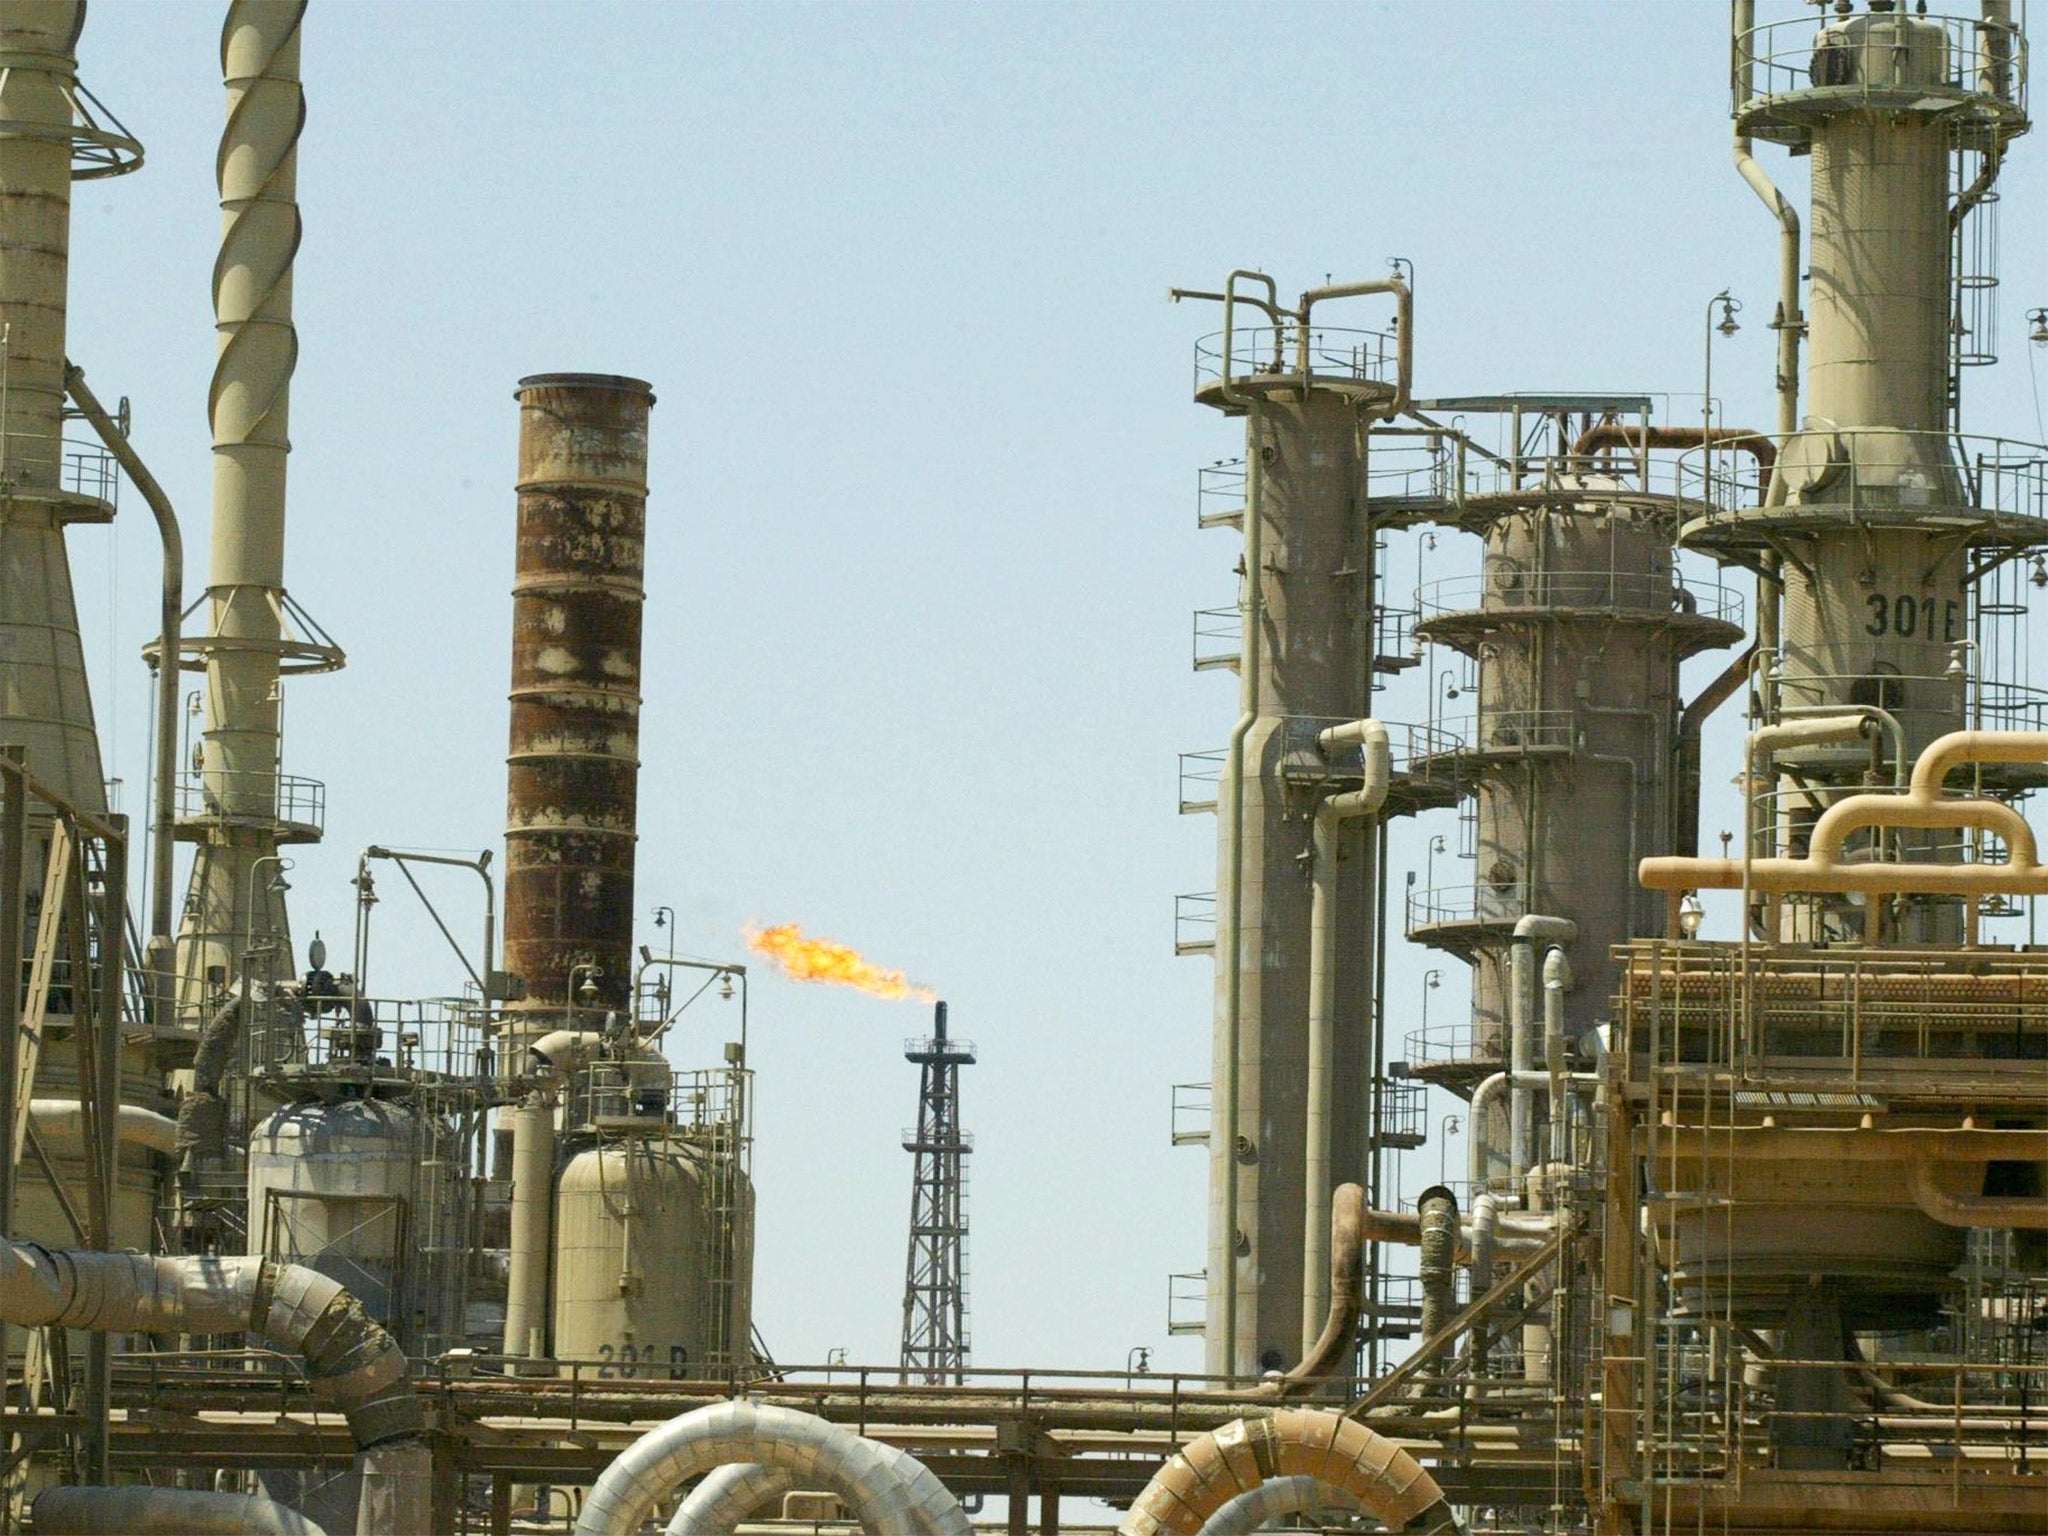 The refinery in Baiji is Iraq's largest